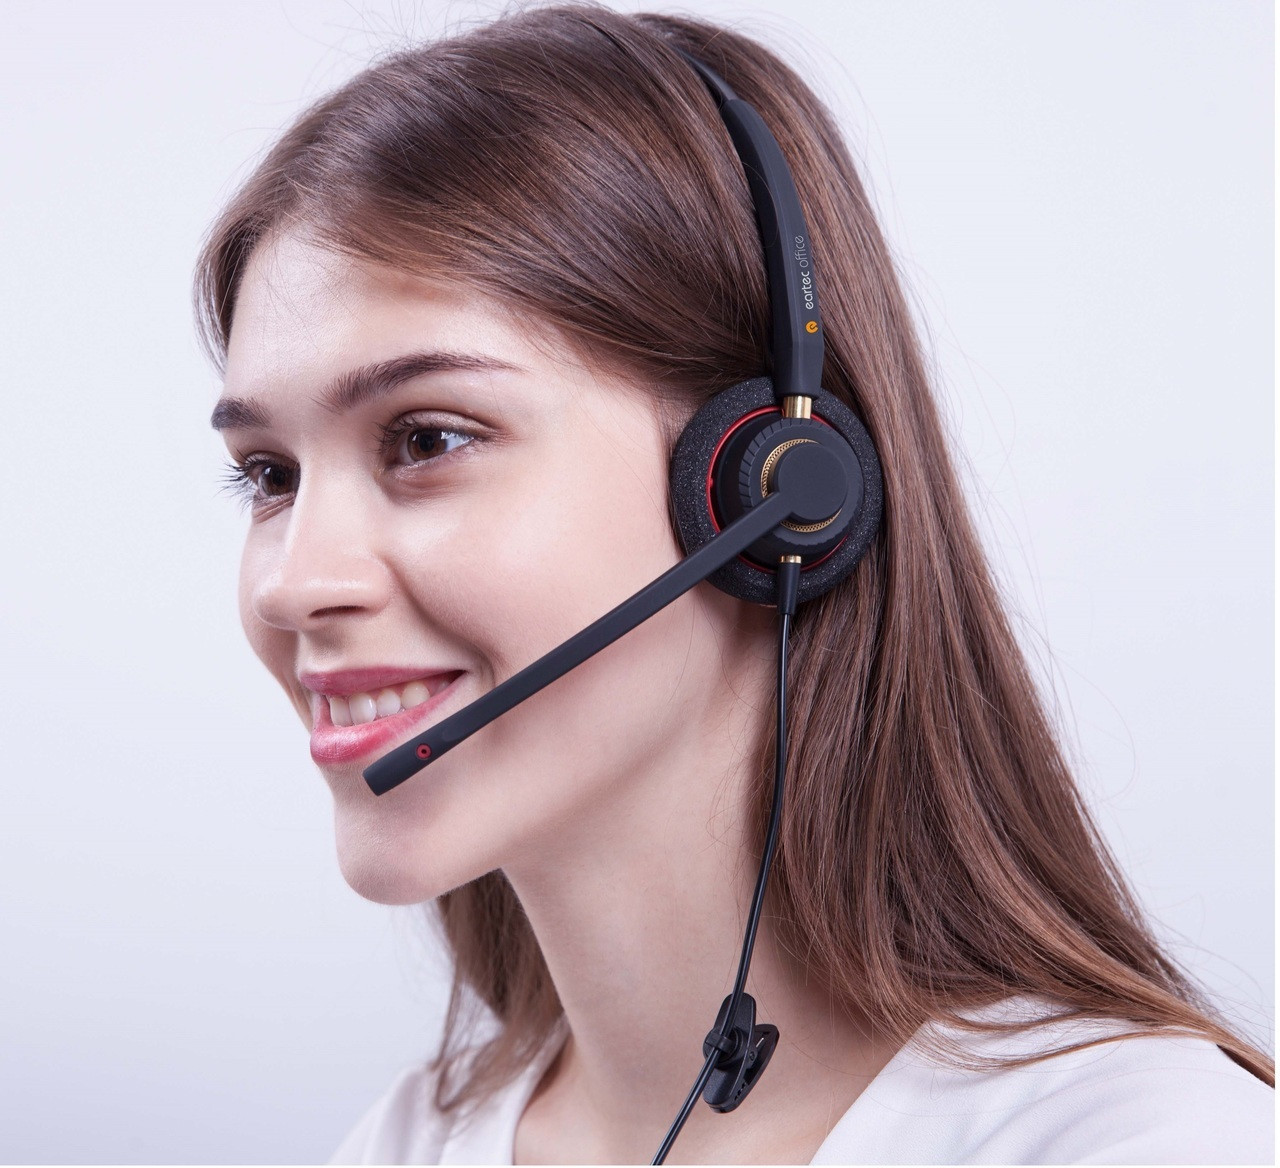 Aastra Office 80 IP Phone Headset - EAR510D